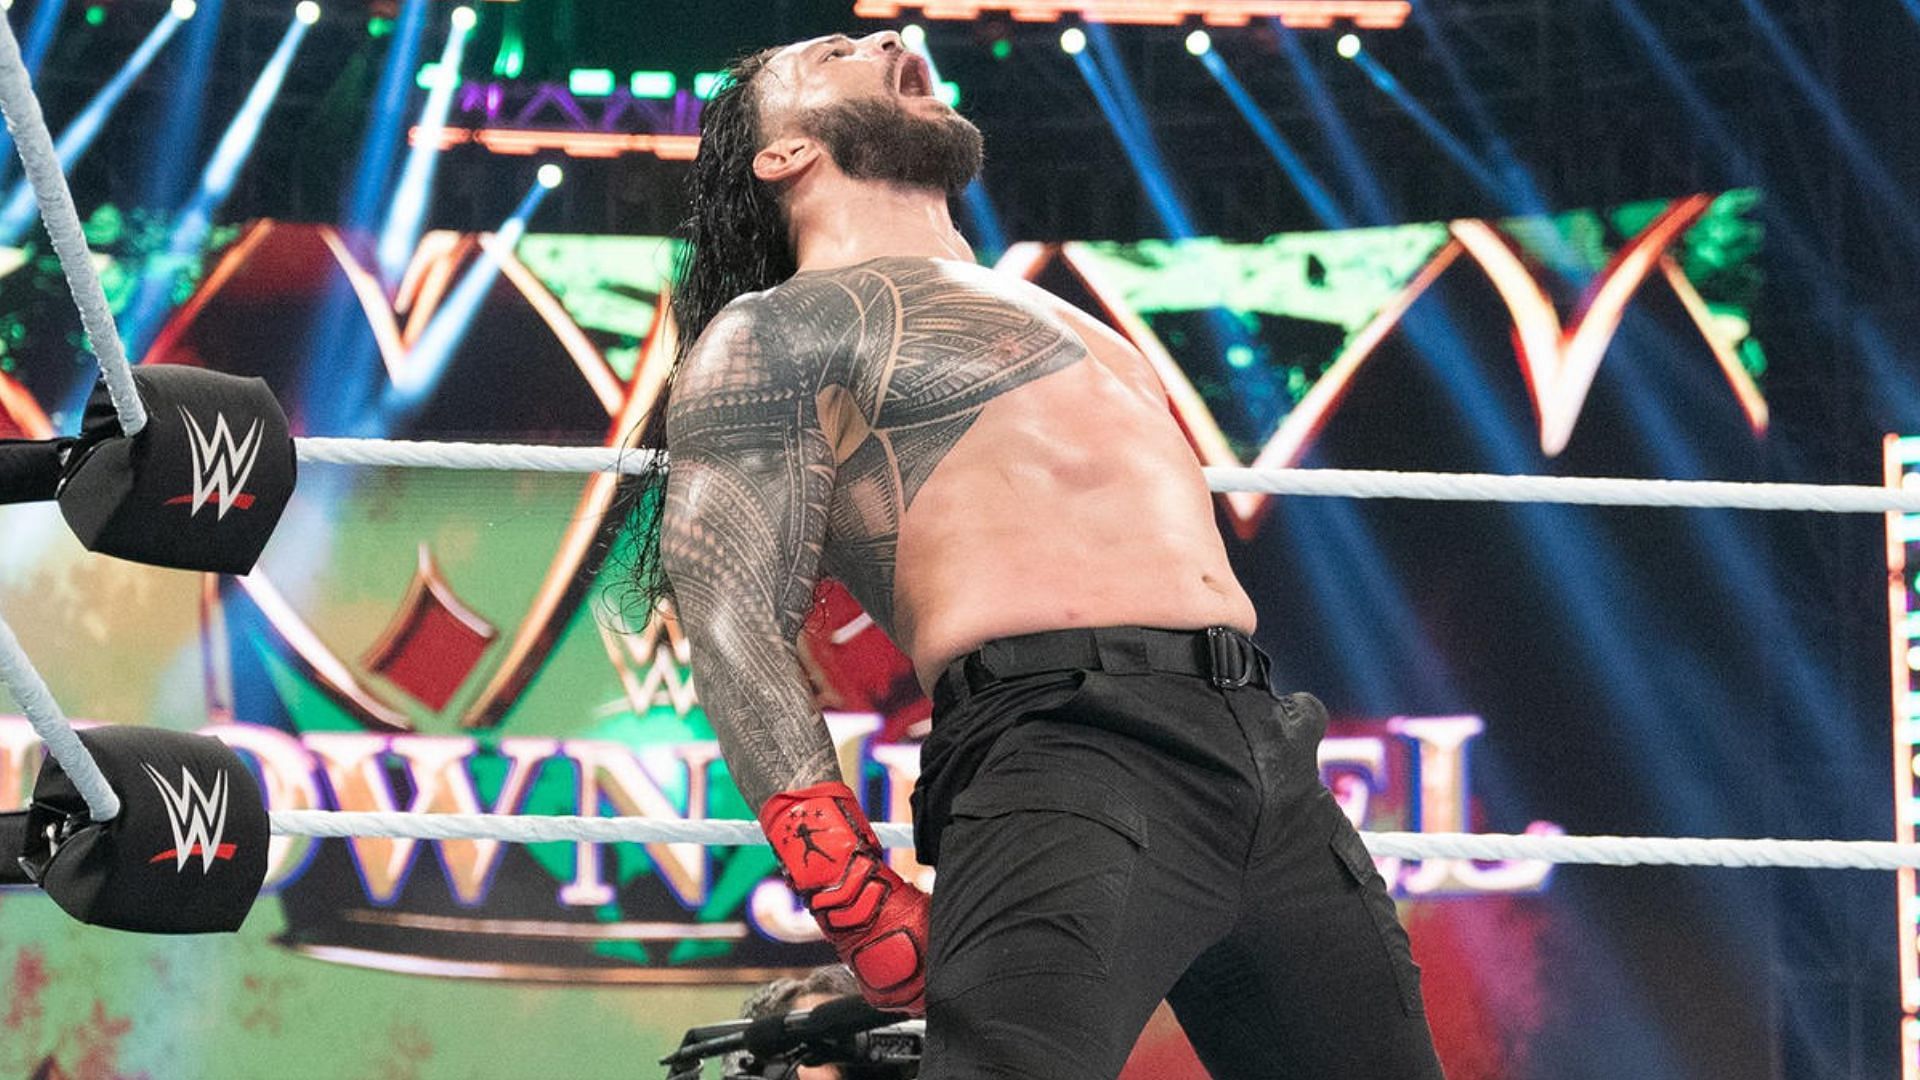 Roman Reigns during his match. Instagram Credits: wwe.com